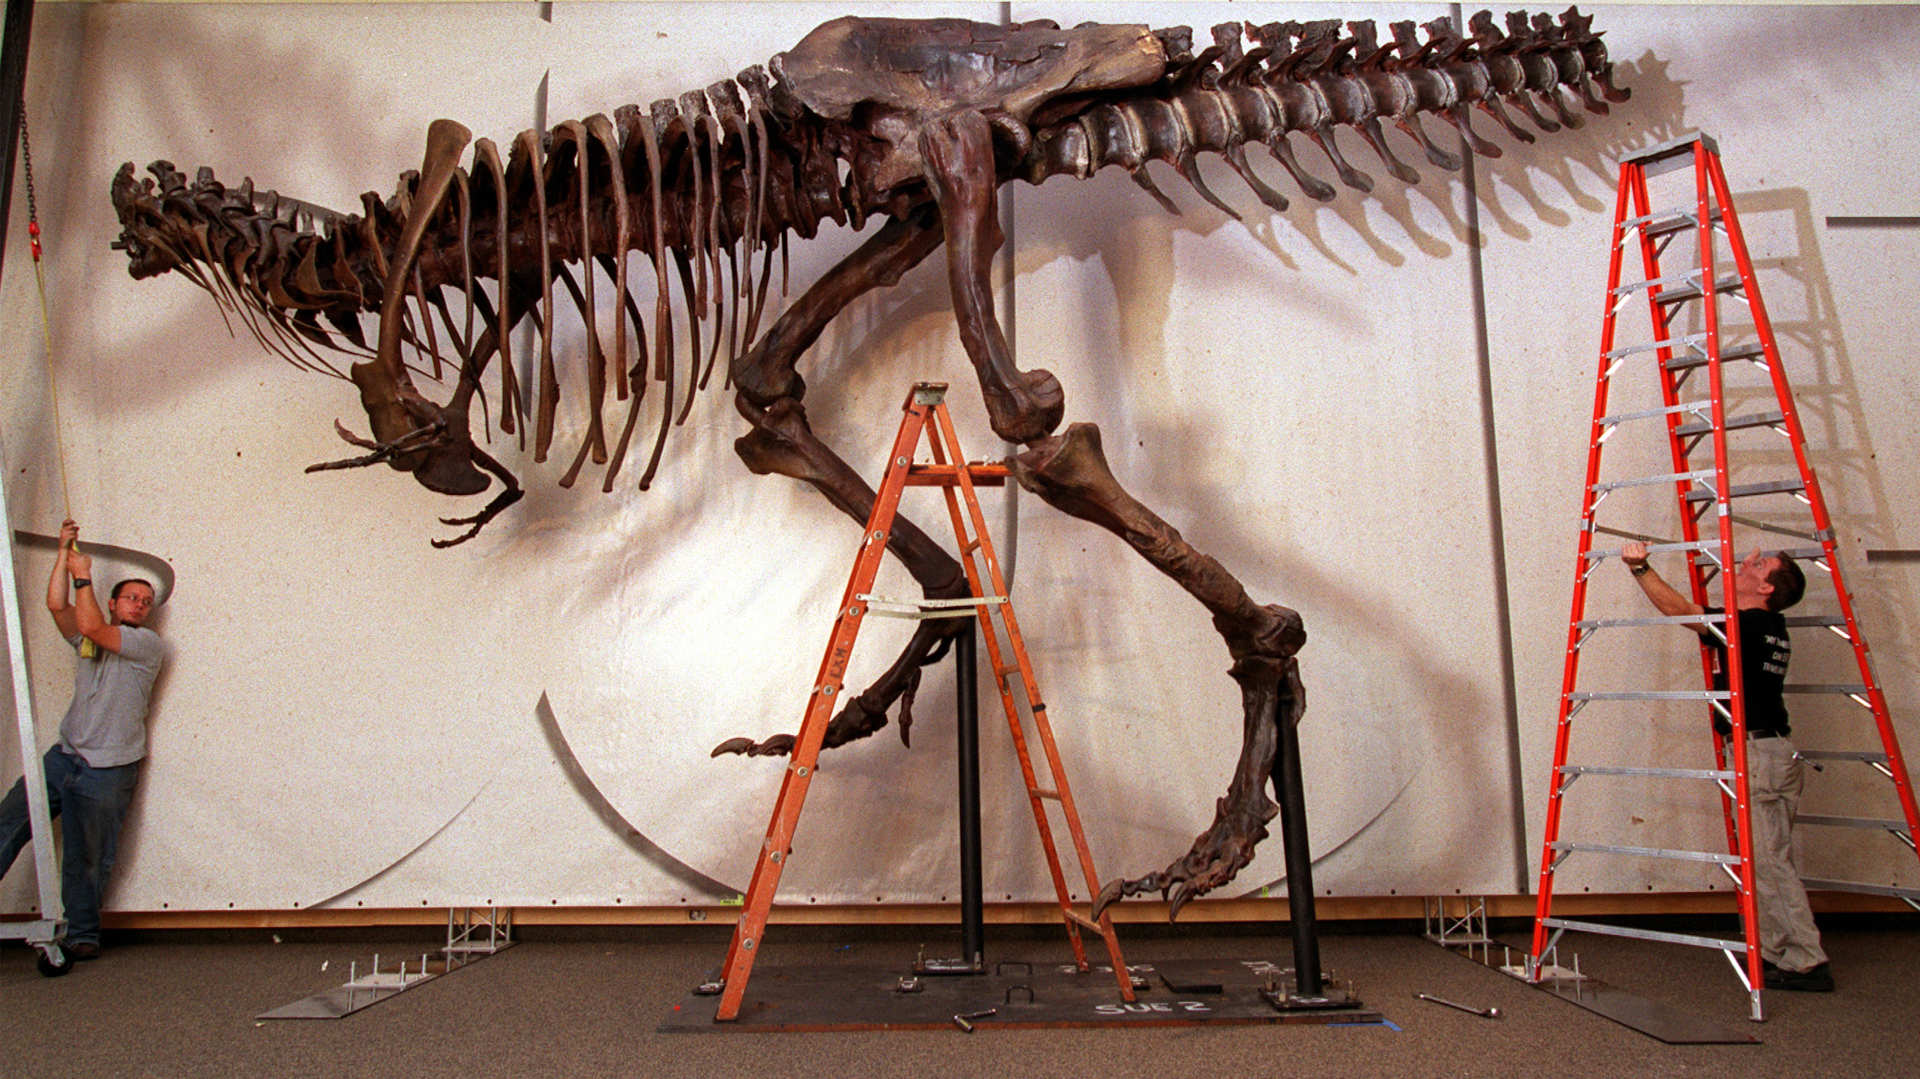 The Tyrannosaurus rex “Sue” — the most complete of its species yet discovered — being assembled in the 1990s.